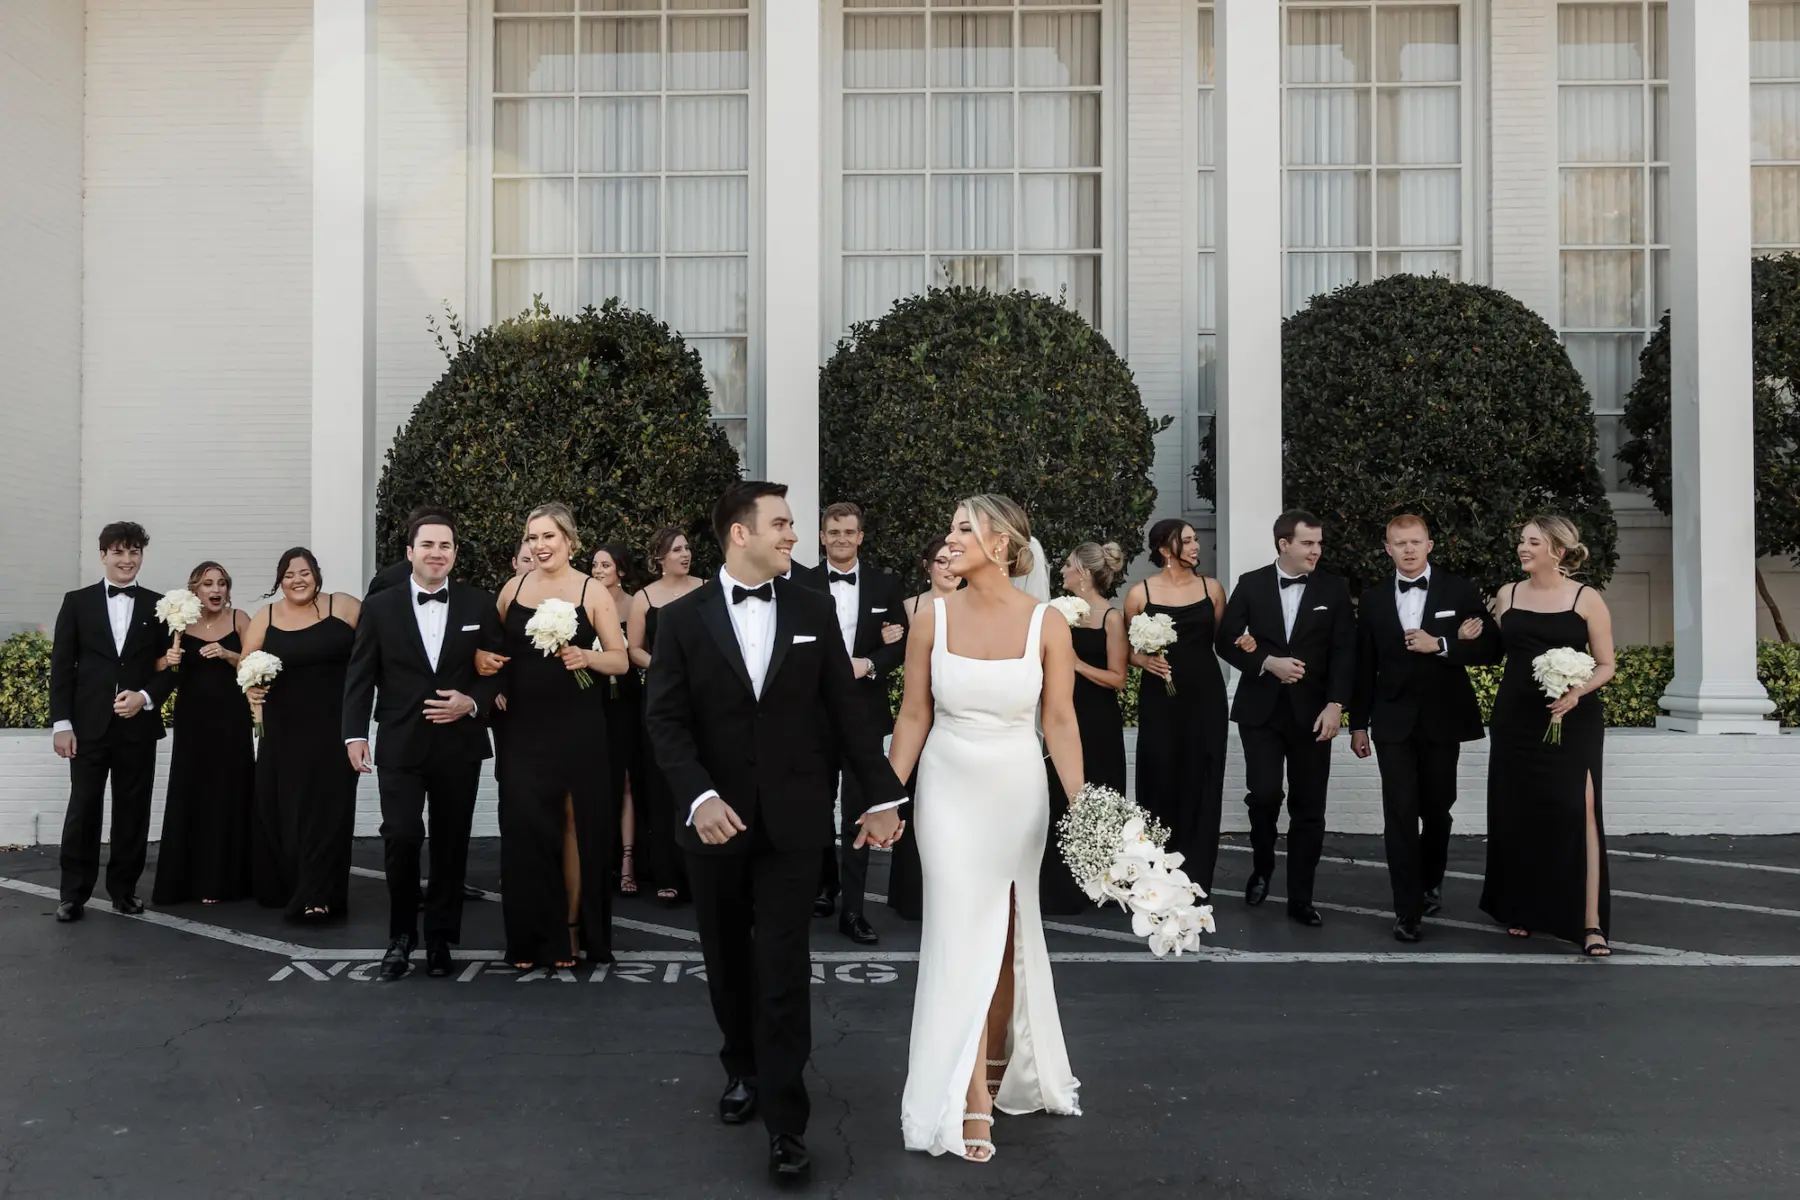 Bride and Groom with Bridal Party | Classic Timeless Black Tie Wedding Attire Inspiration | Tampa Planner Oh My Occasions